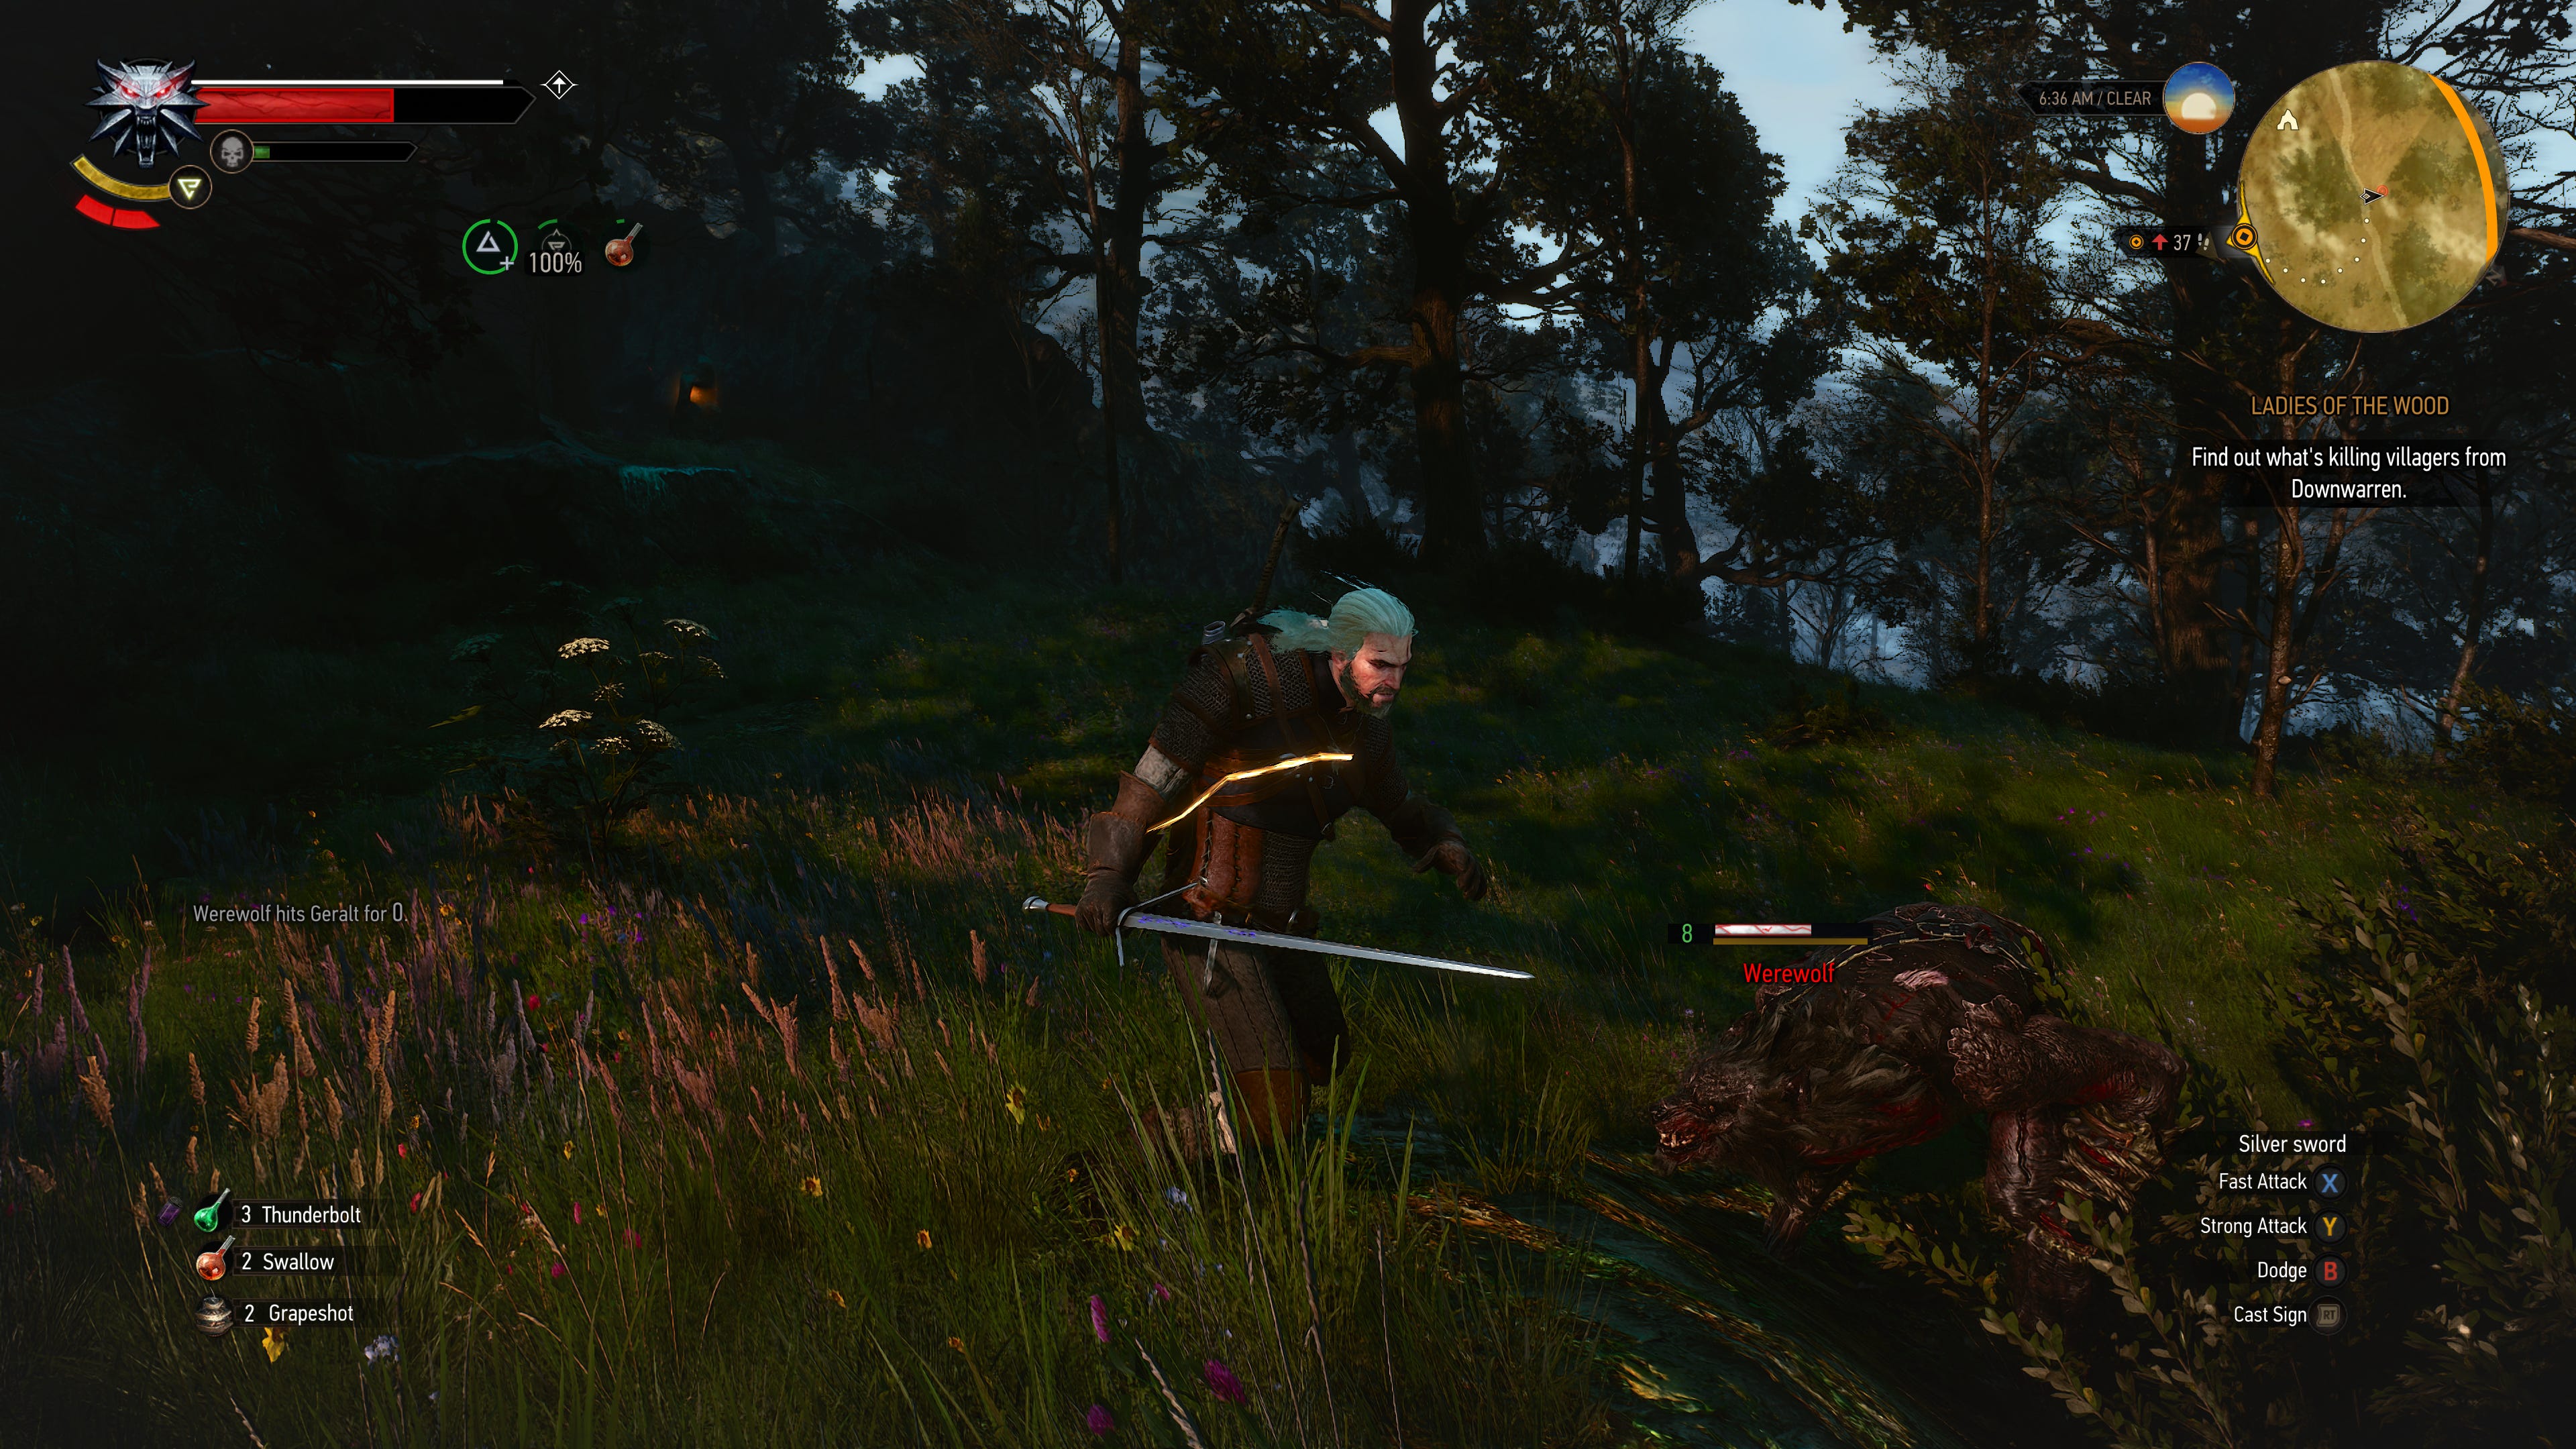 The Witcher 3's' Next-Gen Update Brings More Than Just Prettier Graphics